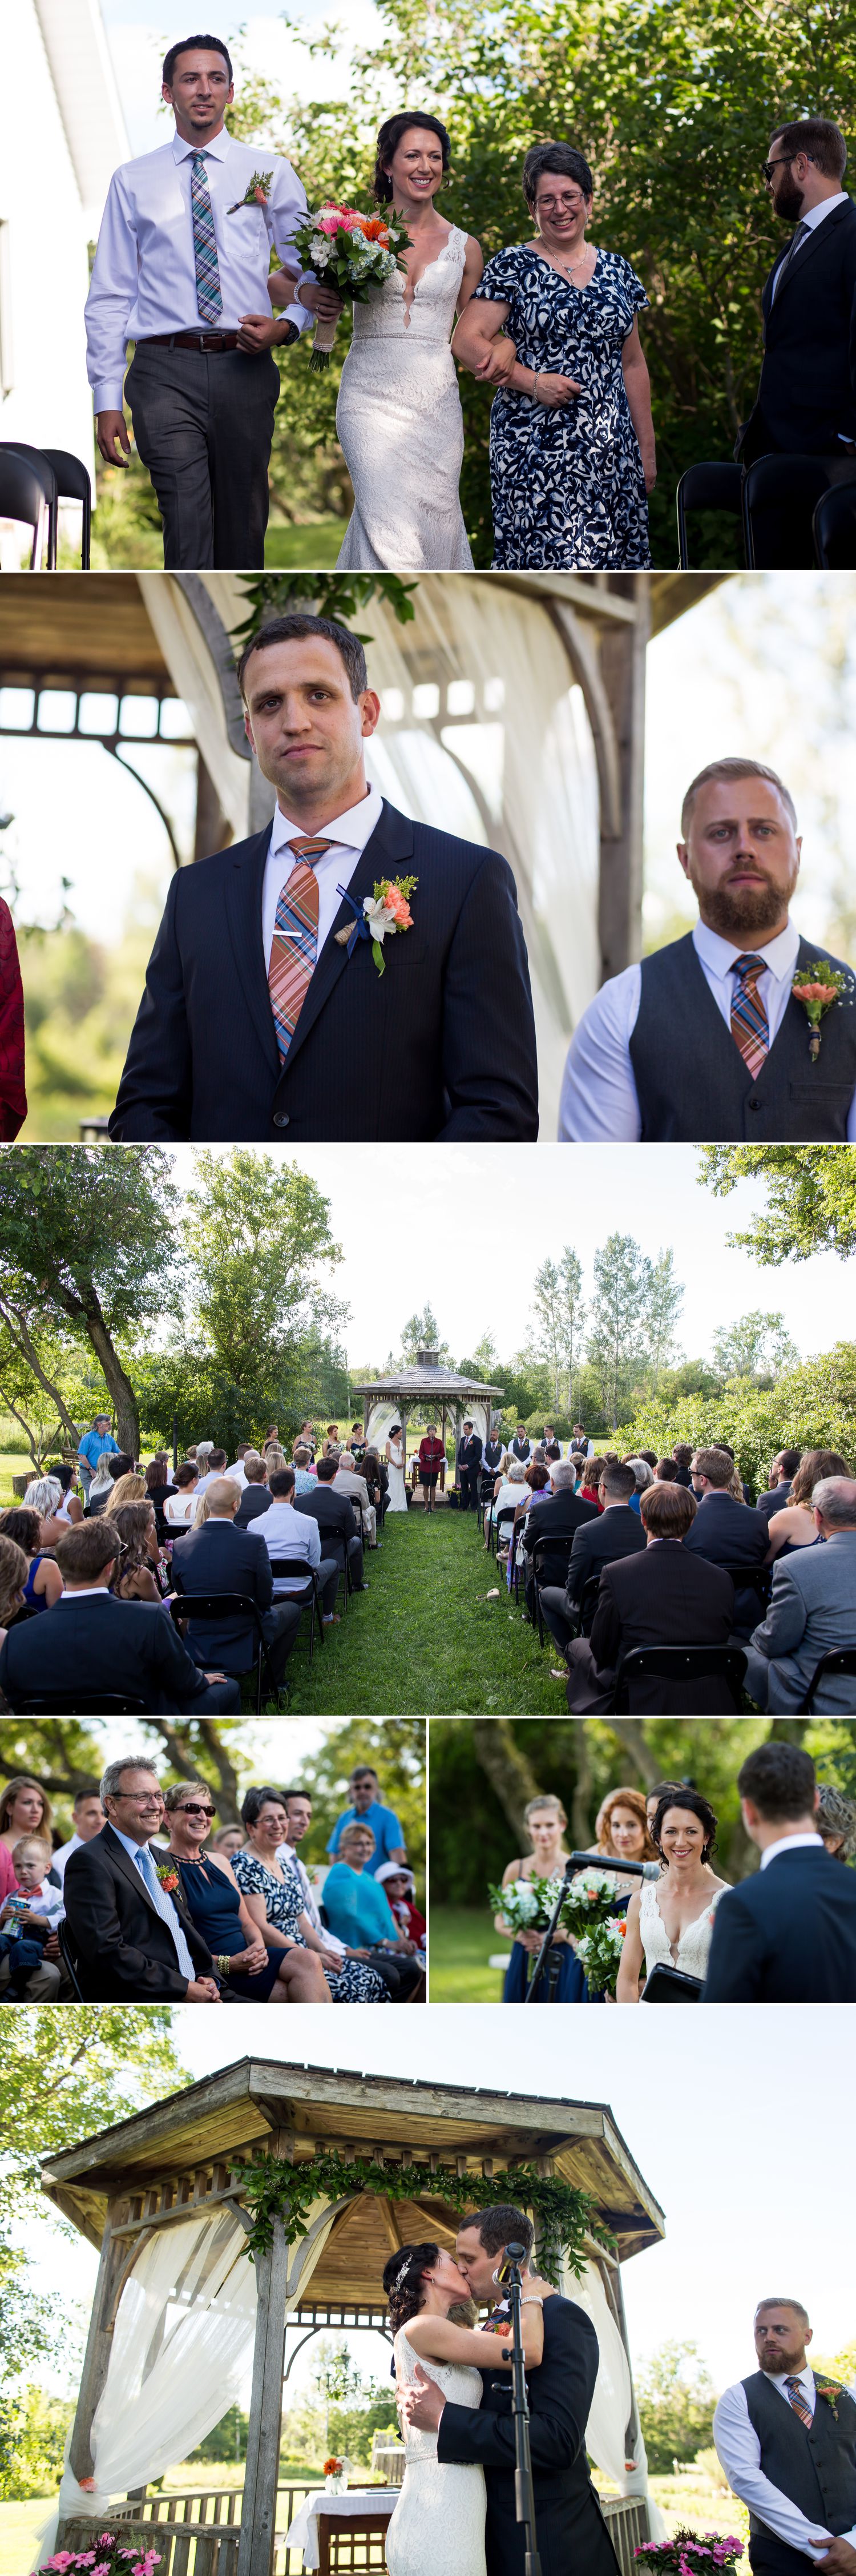 A wedding ceremony at The Herb Garden in Almonte Quebec